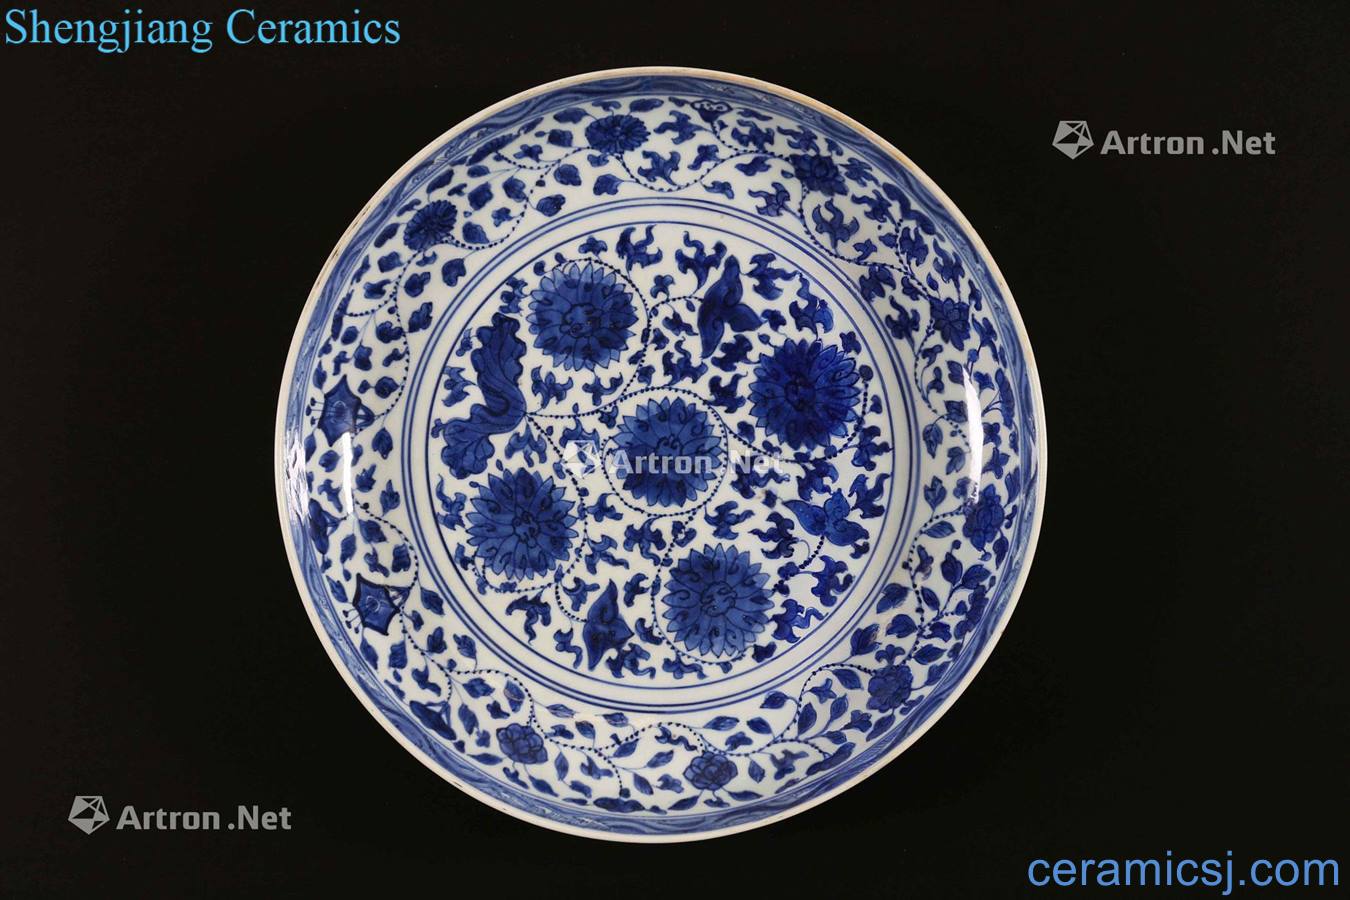 THE Qing dynasty made A PORCELAIN DISH IN THE MING STYLECHINA